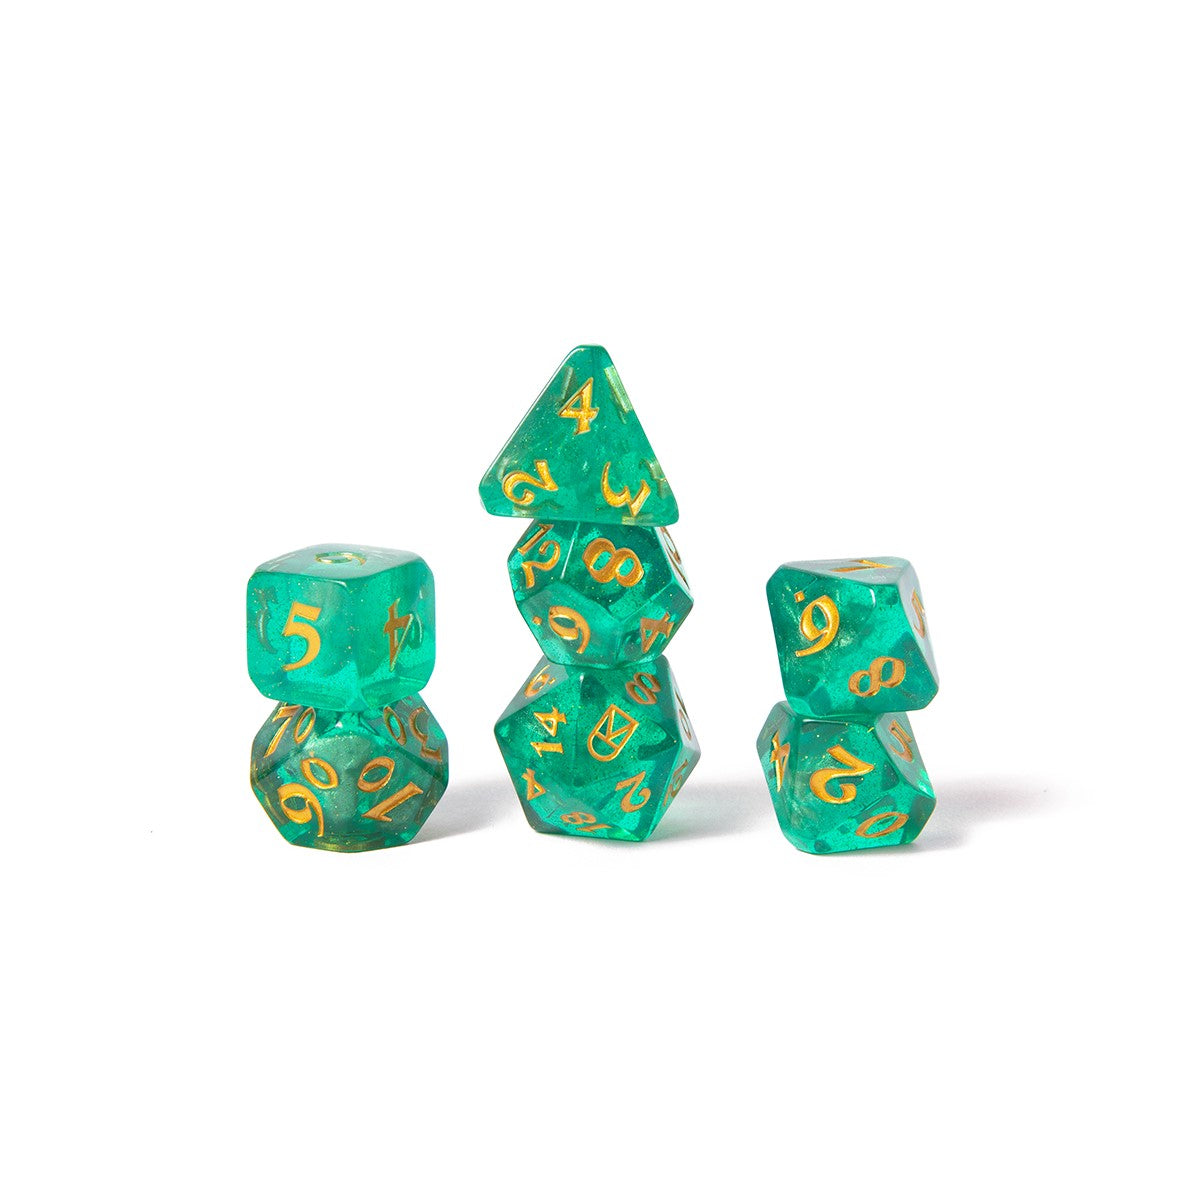 MIGHTY NEIN DICE SET: THE TRAVELER dice bag and dice set based on a NPC in Critical Role's campaign 2 Mighty Nein